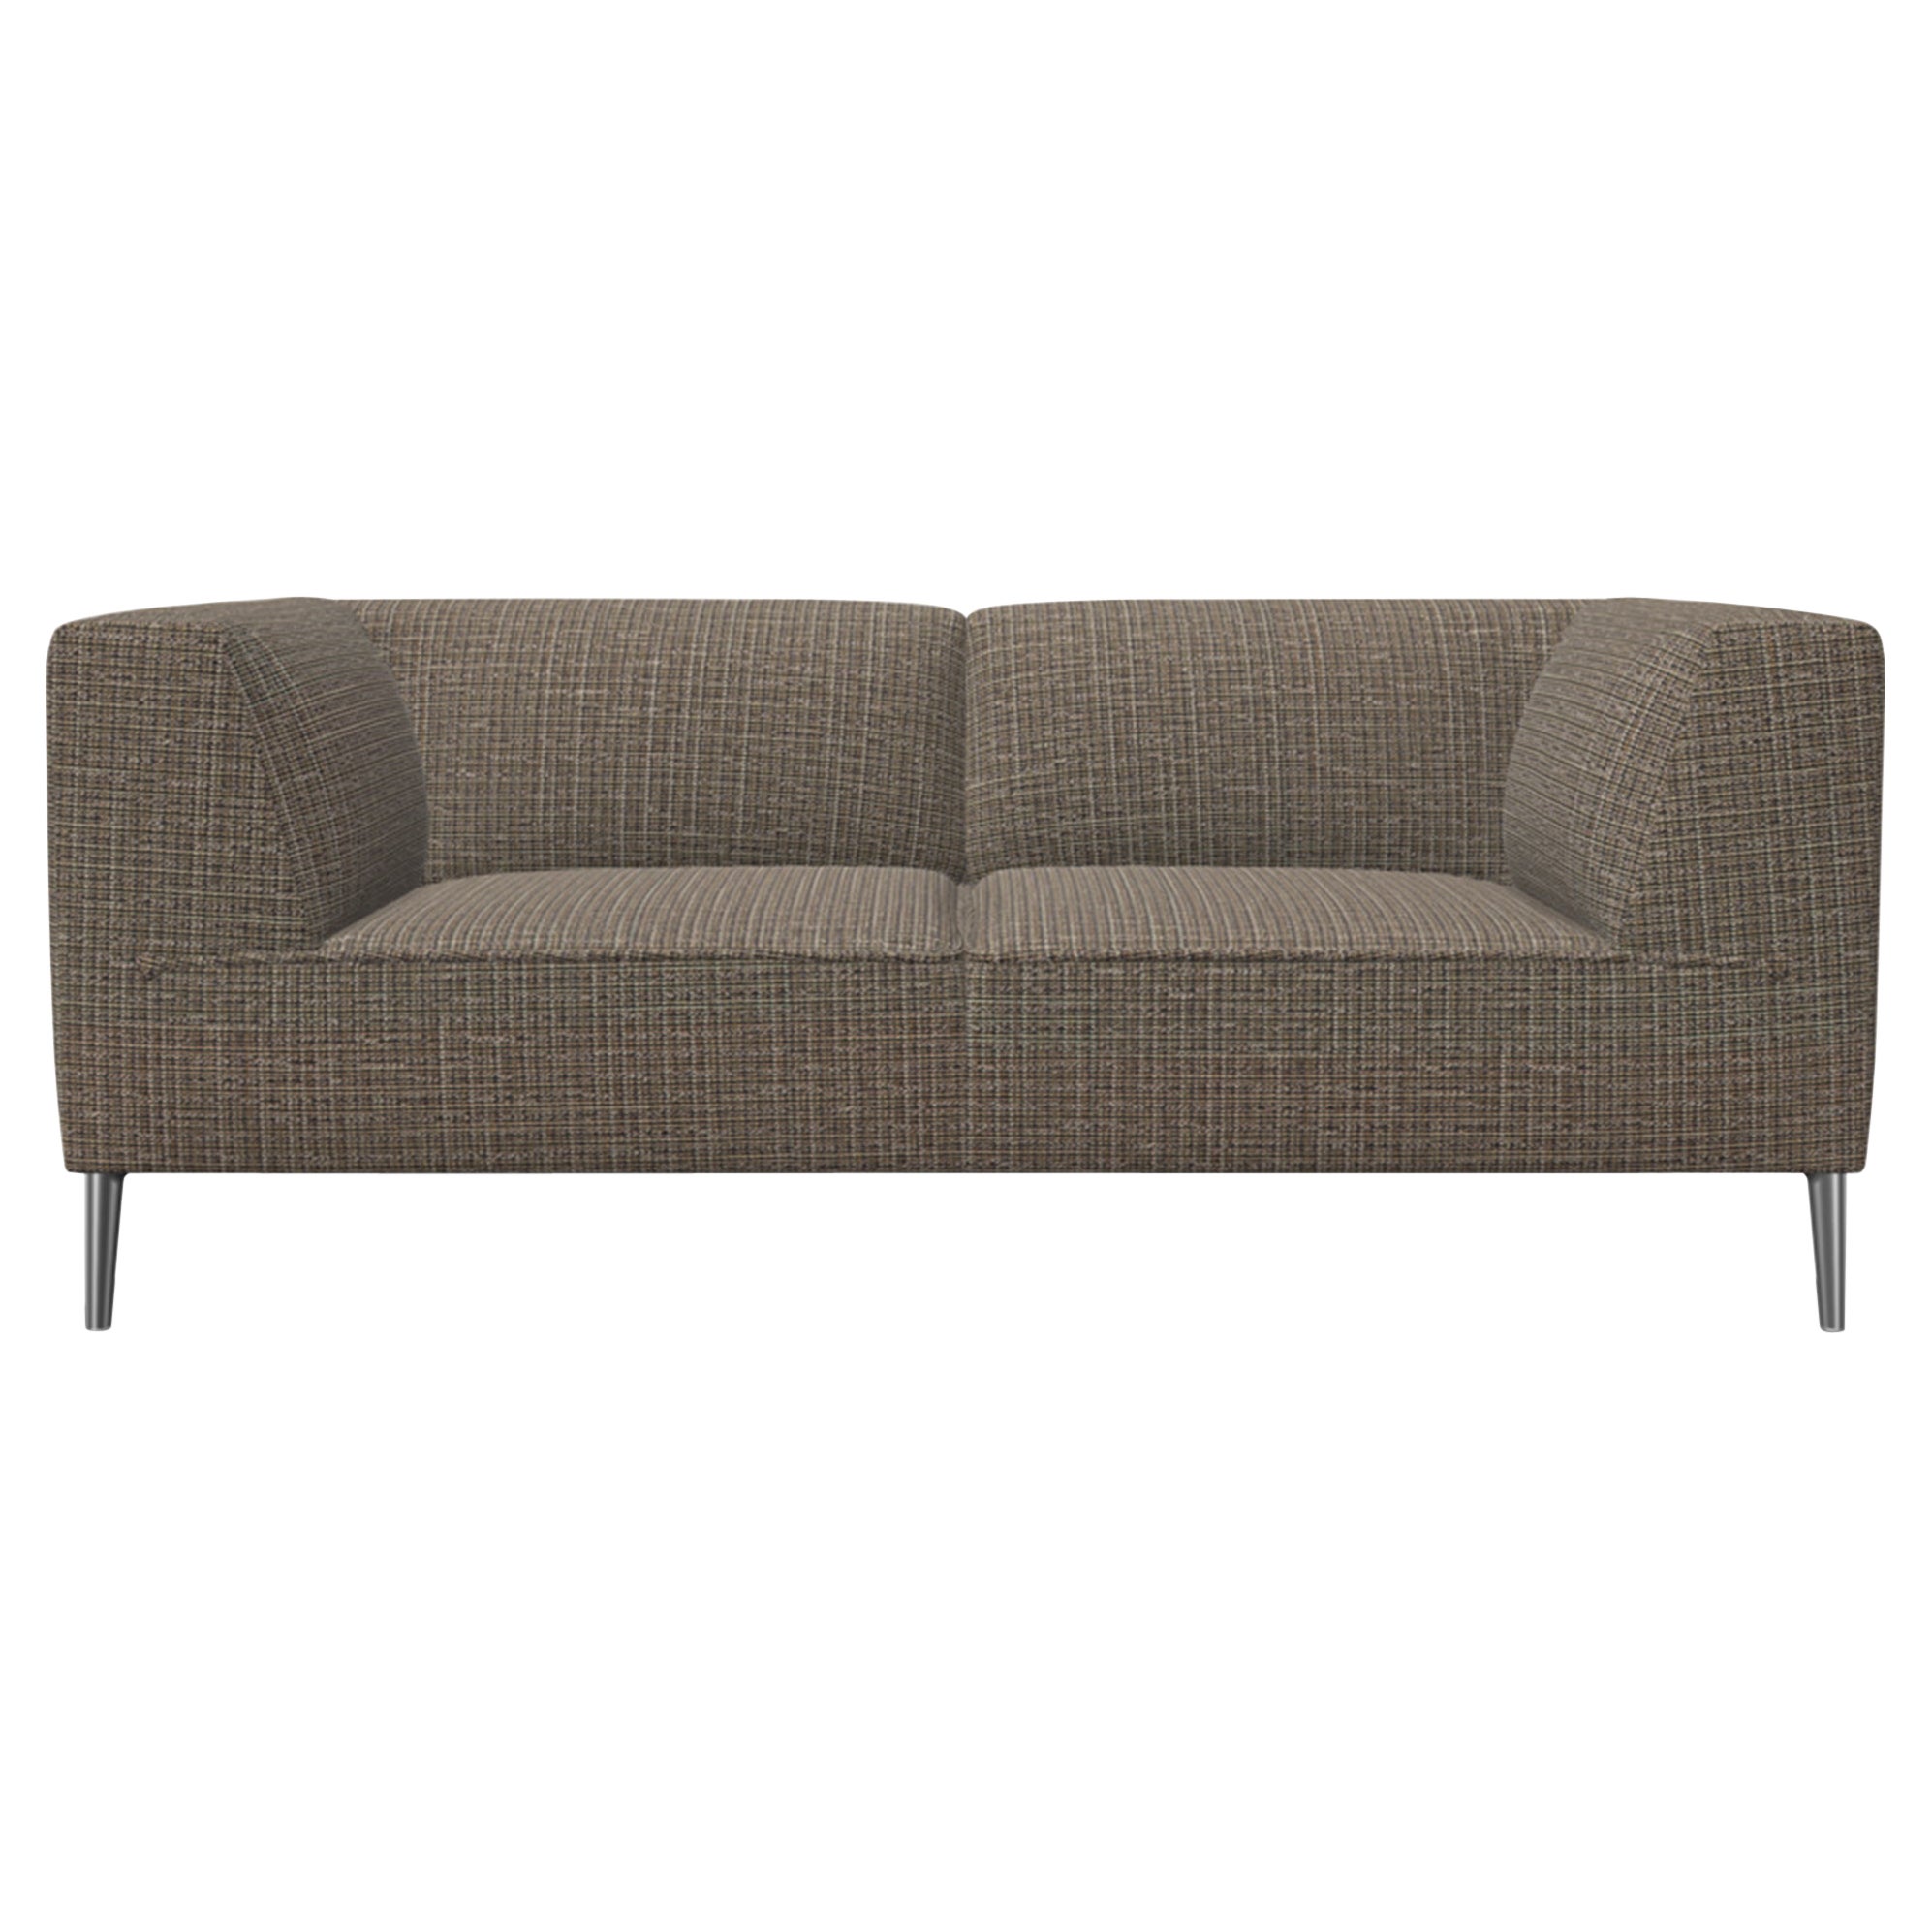 Moooi Double Seat Sofa So Good in Brown Upholstery with Polished Aluminum Feet For Sale